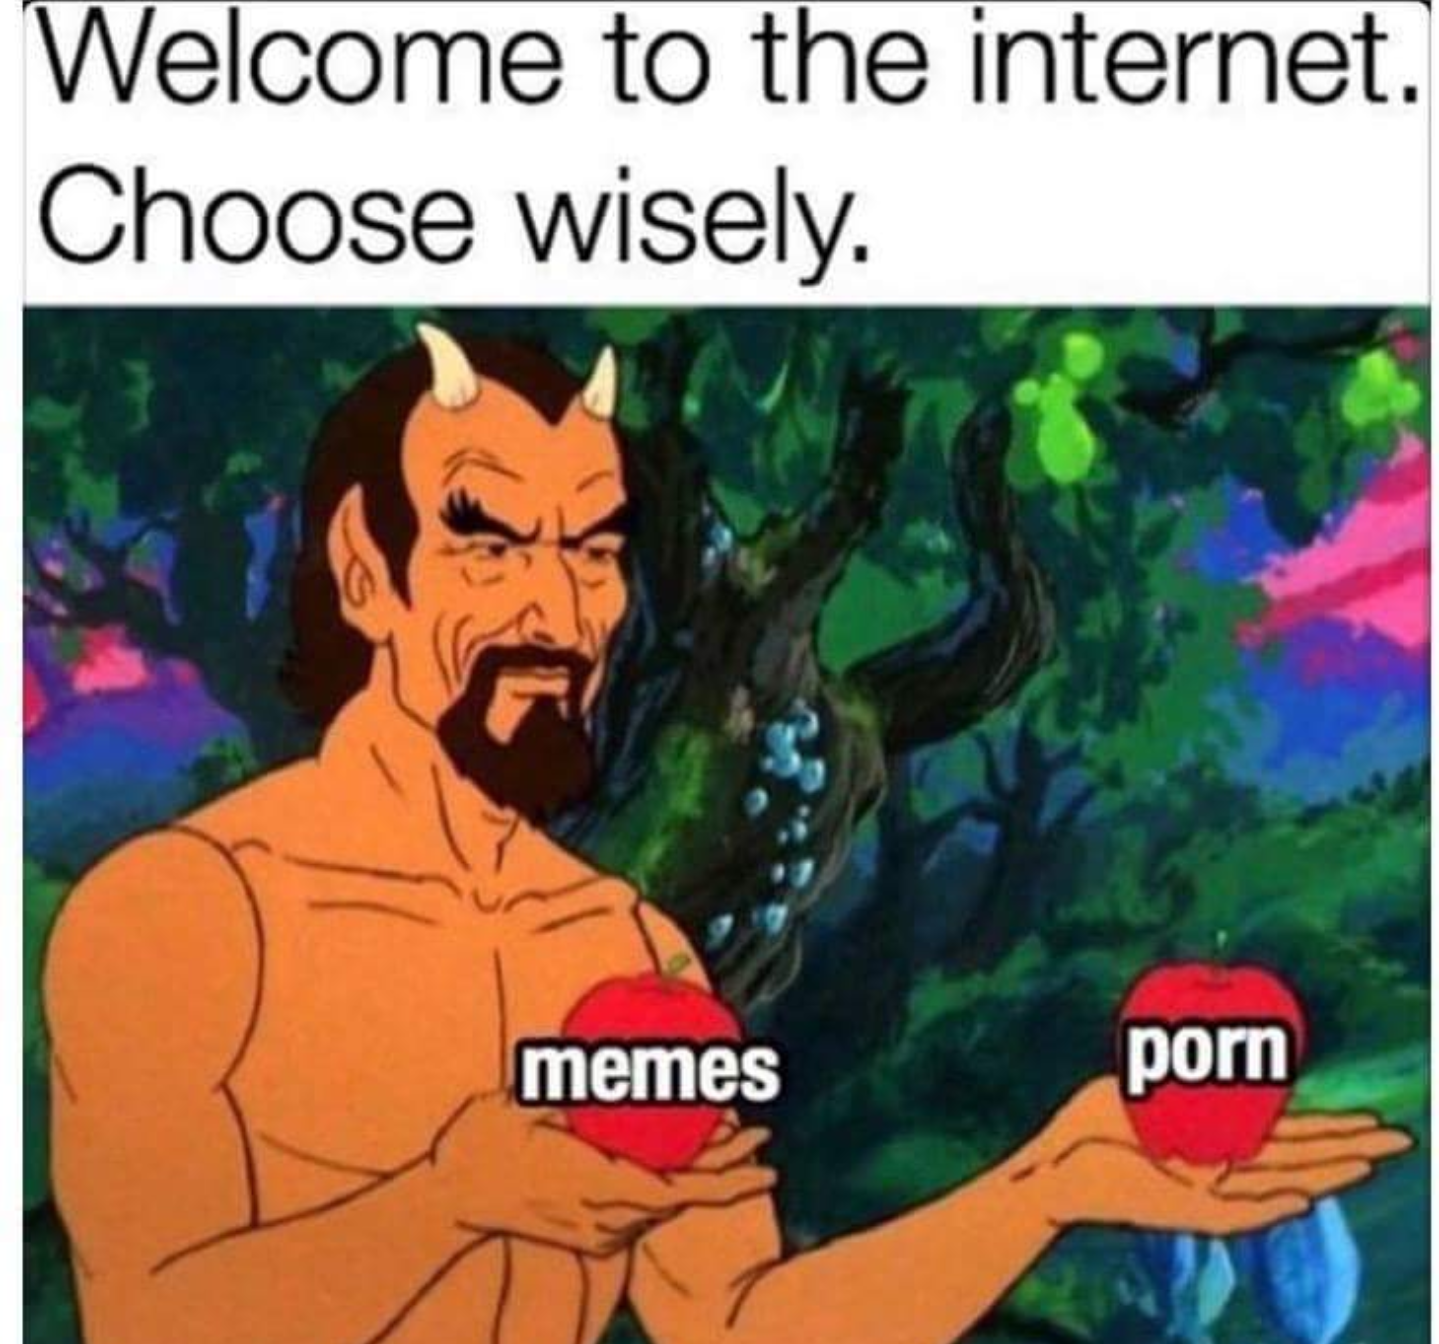 choose meme - Welcome to the internet. Choose wisely. memes porn